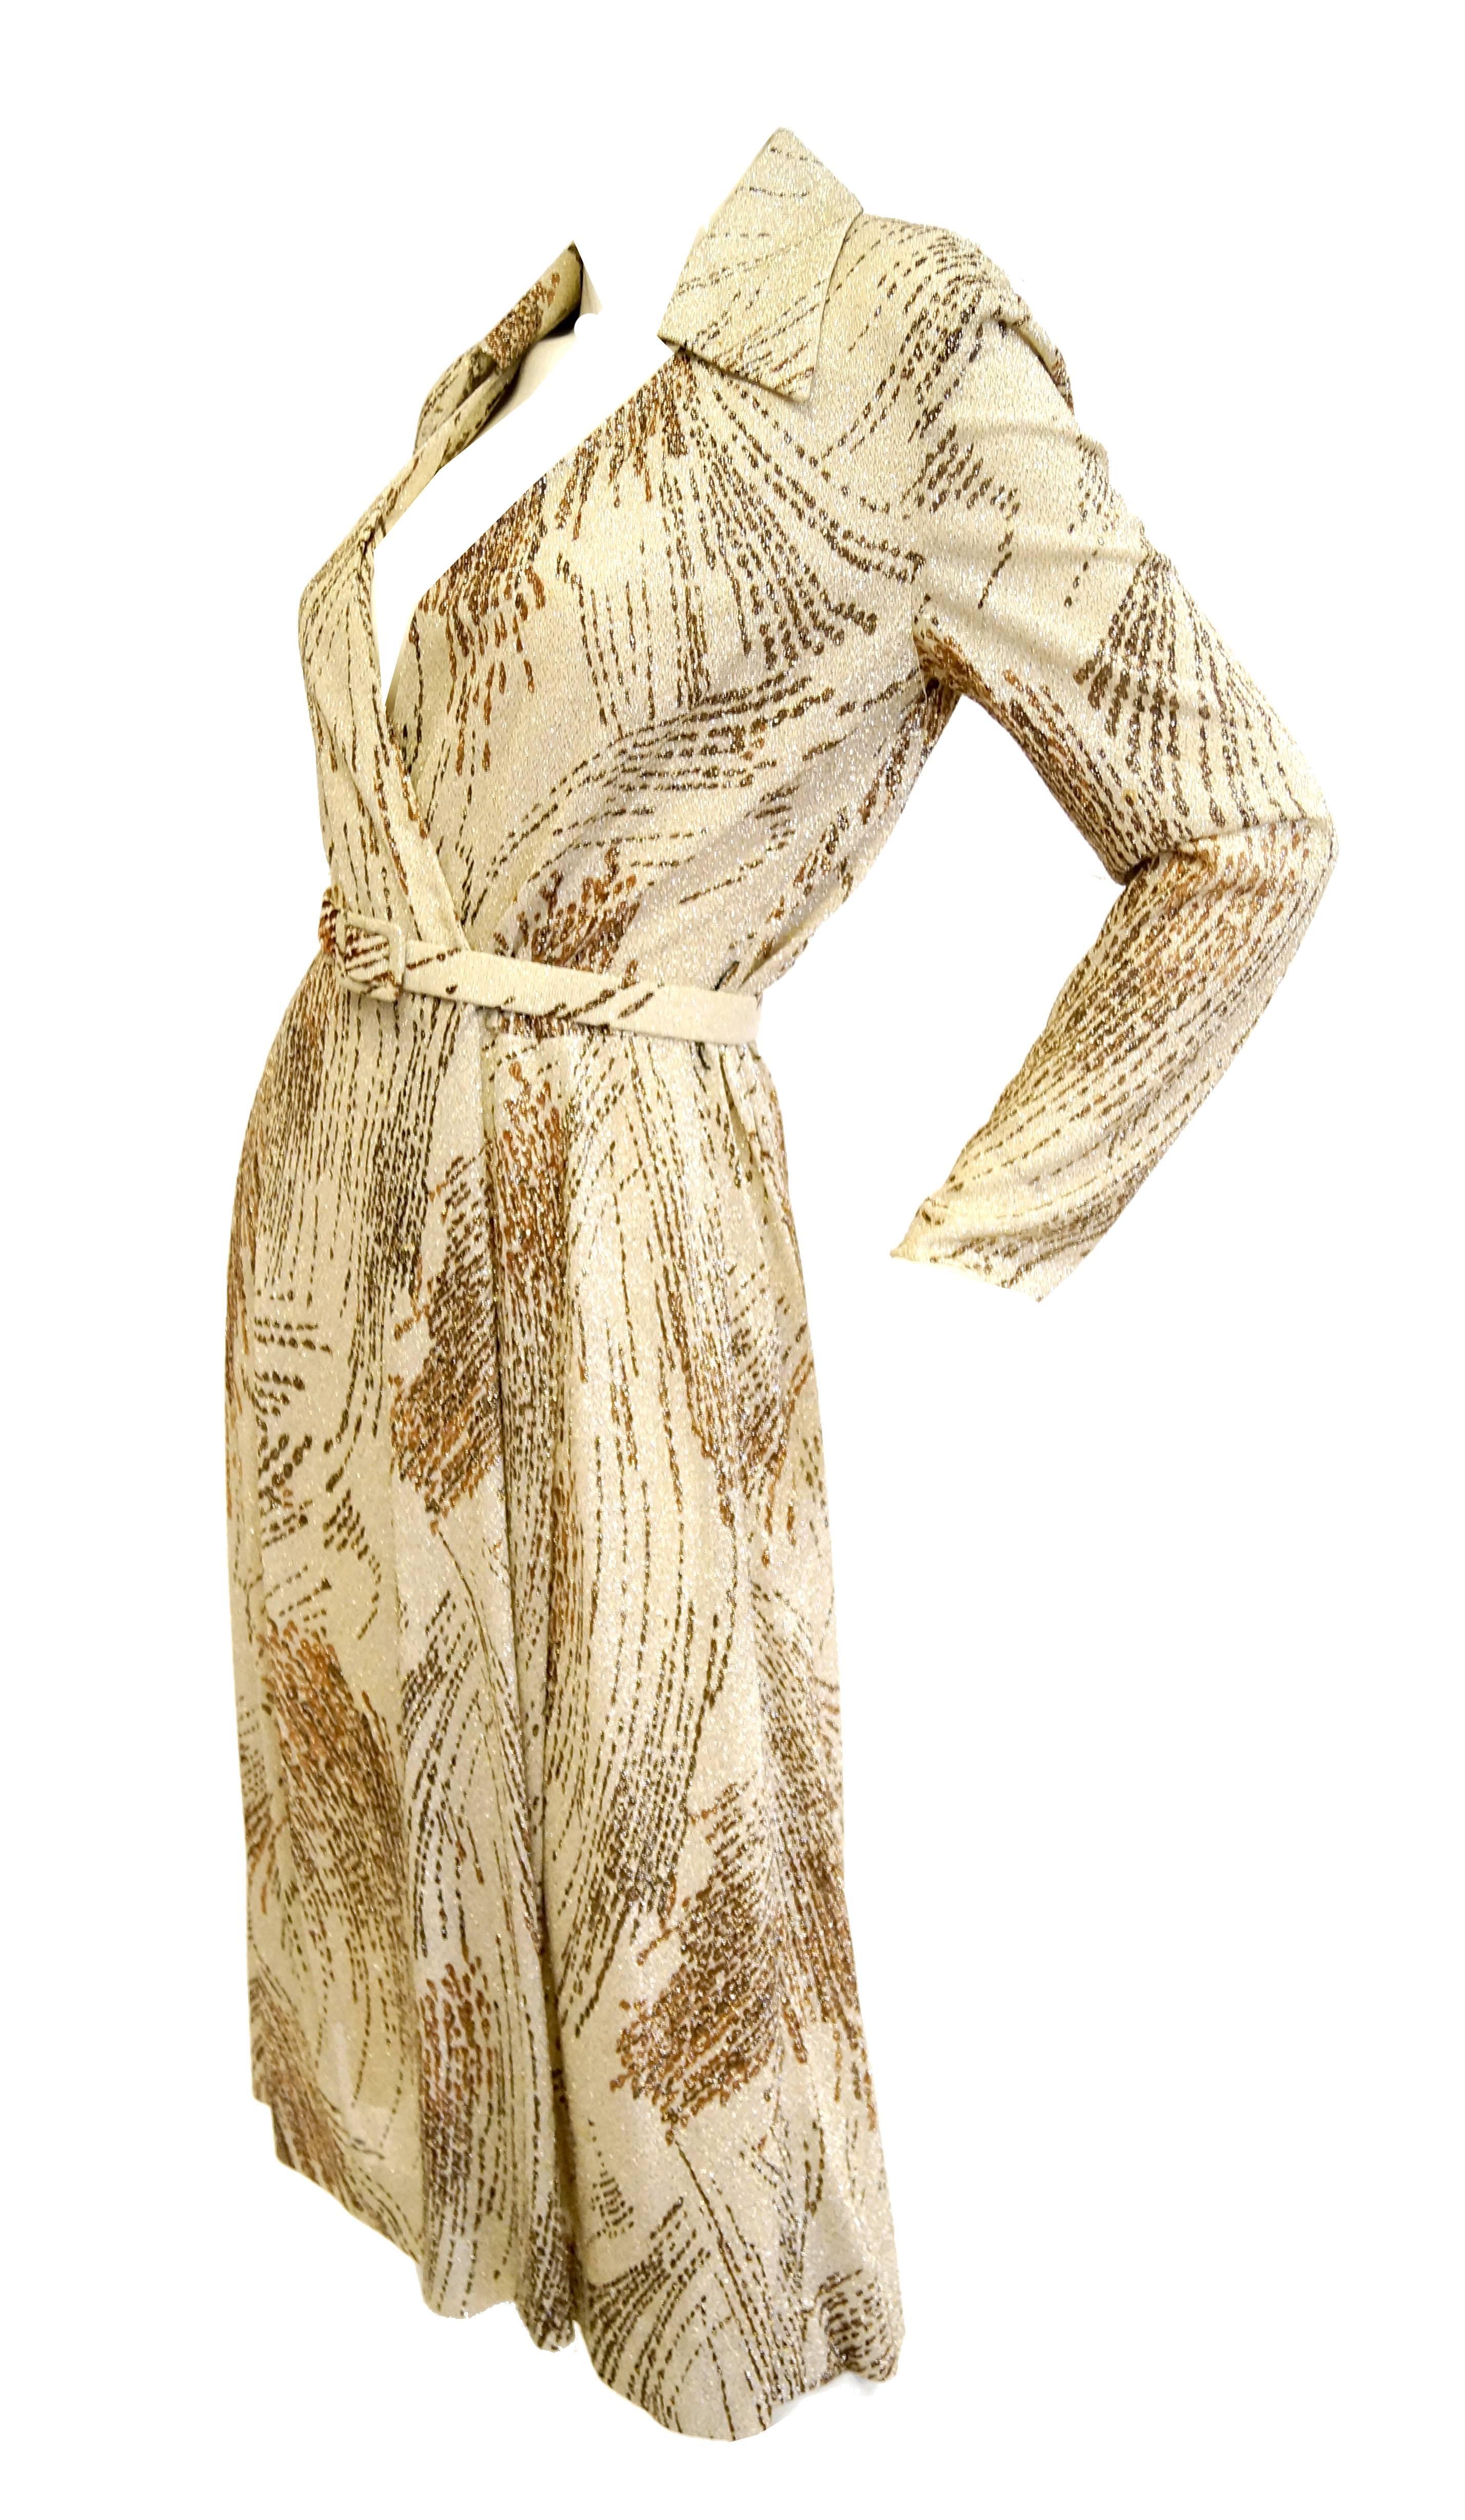 This gorgeous knit dress by Adele Simpson is wildly streaked with shimmering metallic thread marks reminiscent of the tail end of a comet, or the paint splatter of a Pollock! The wrap dress is midi length, features long sleeves, and a wing collar.